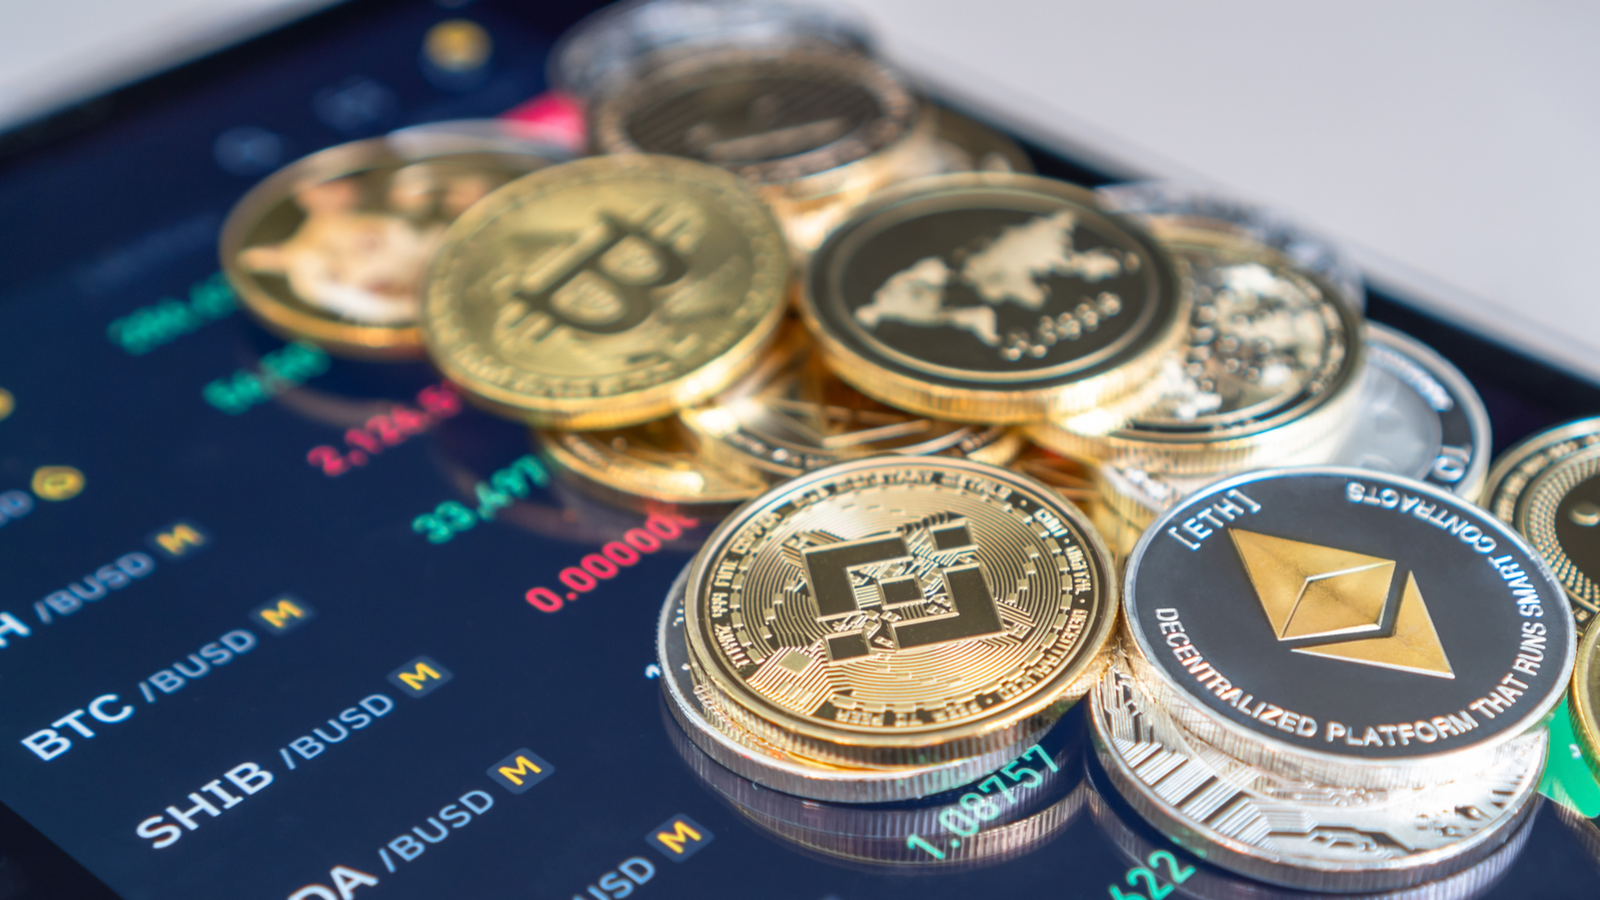 The 7 Most Undervalued Cryptos to Buy in February 2023